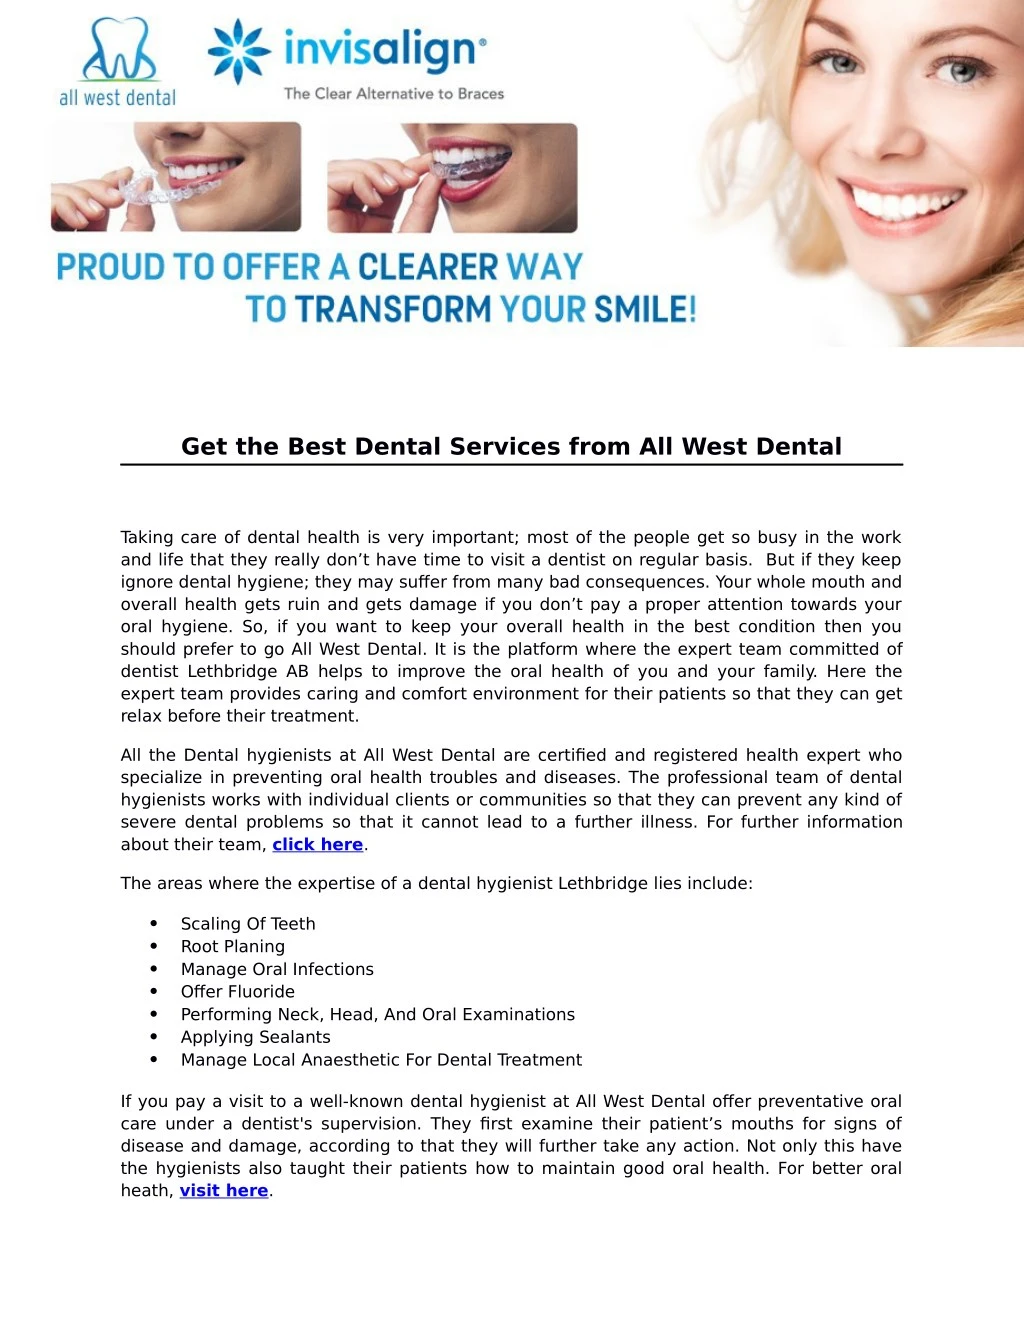 get the best dental services from all west dental